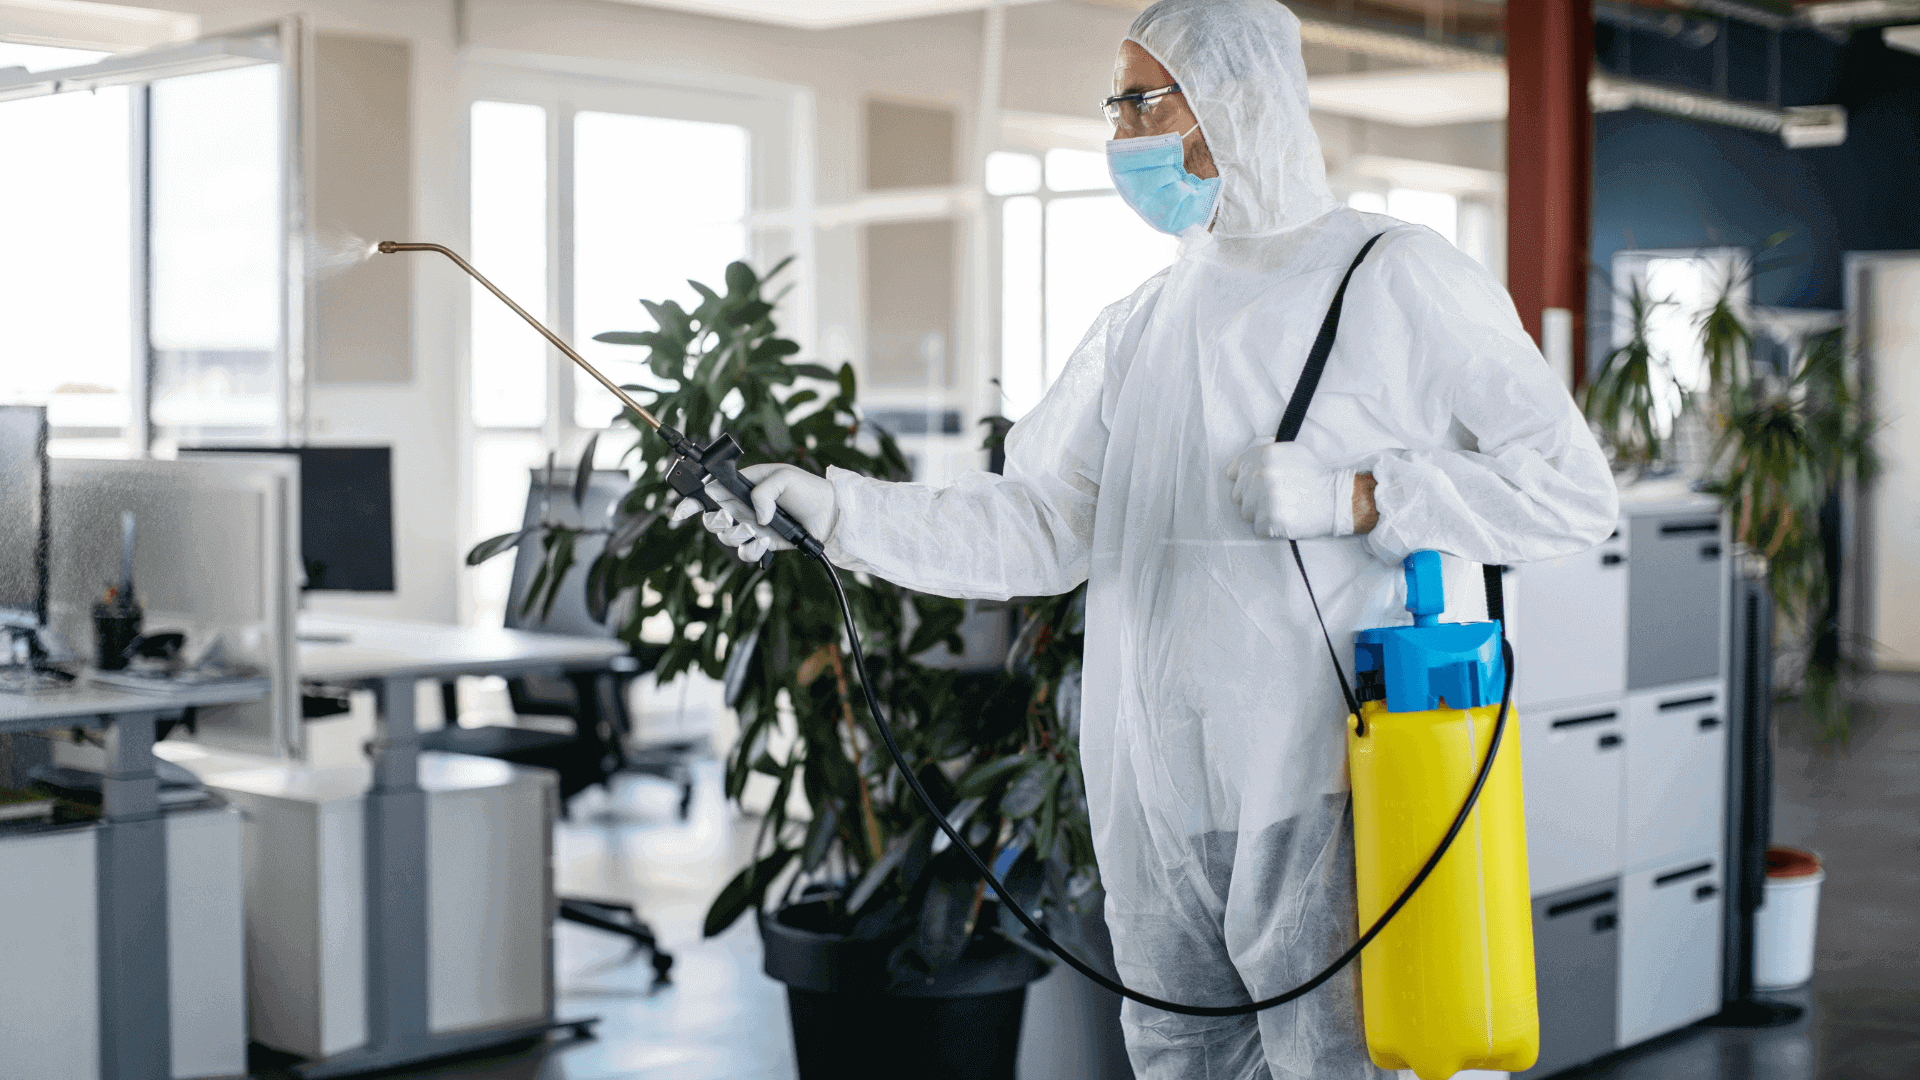 cleaning companies improves their methodologies on cleaning and disinfecting